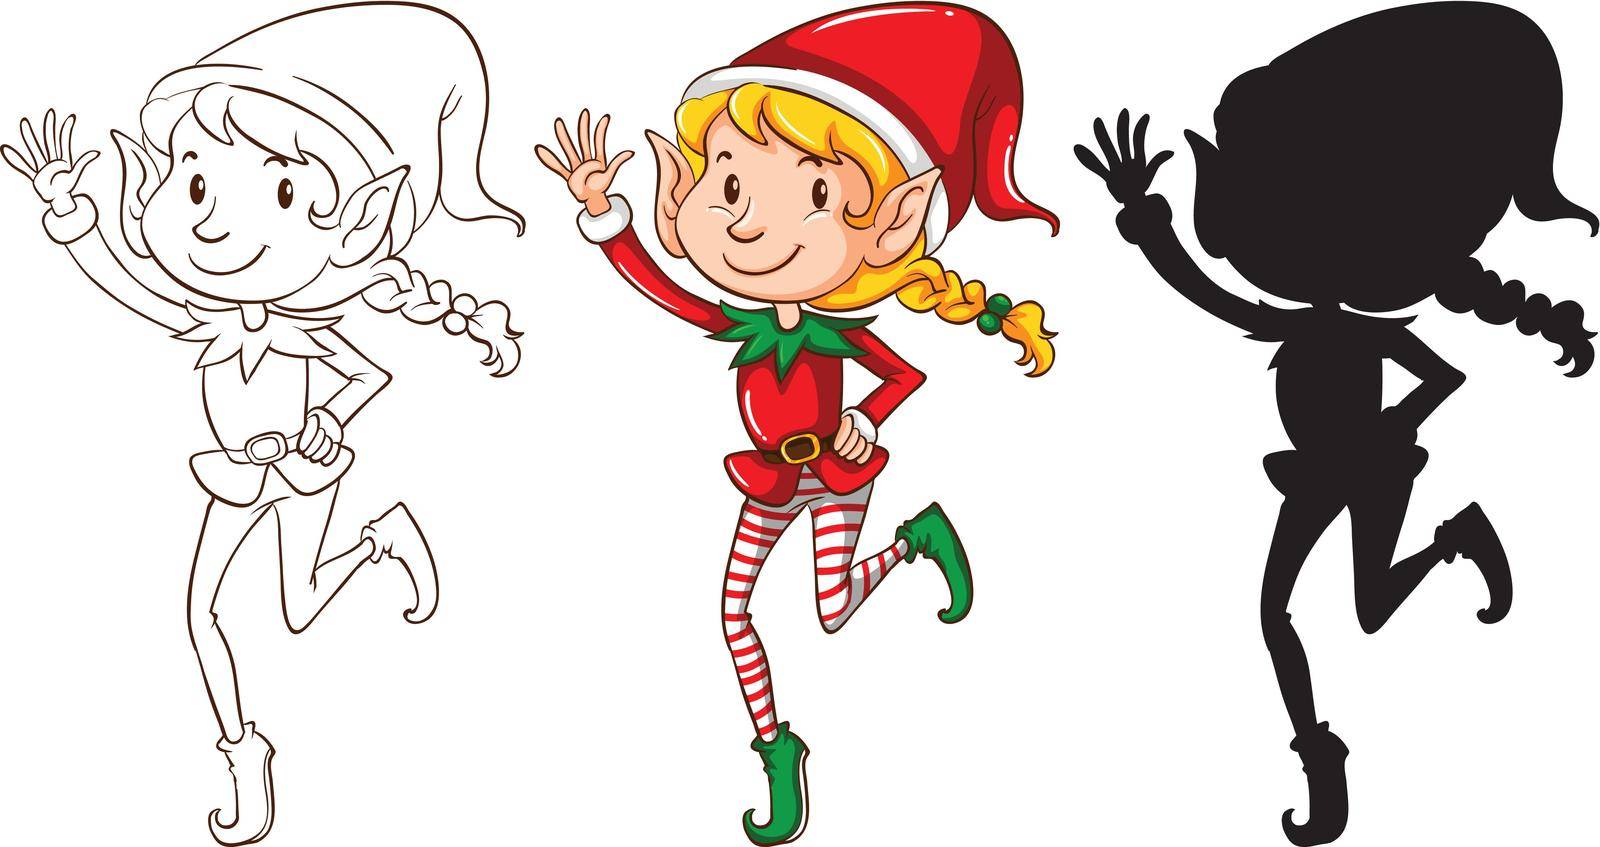 Illustration of the sketches of an elf in three colors on a white background